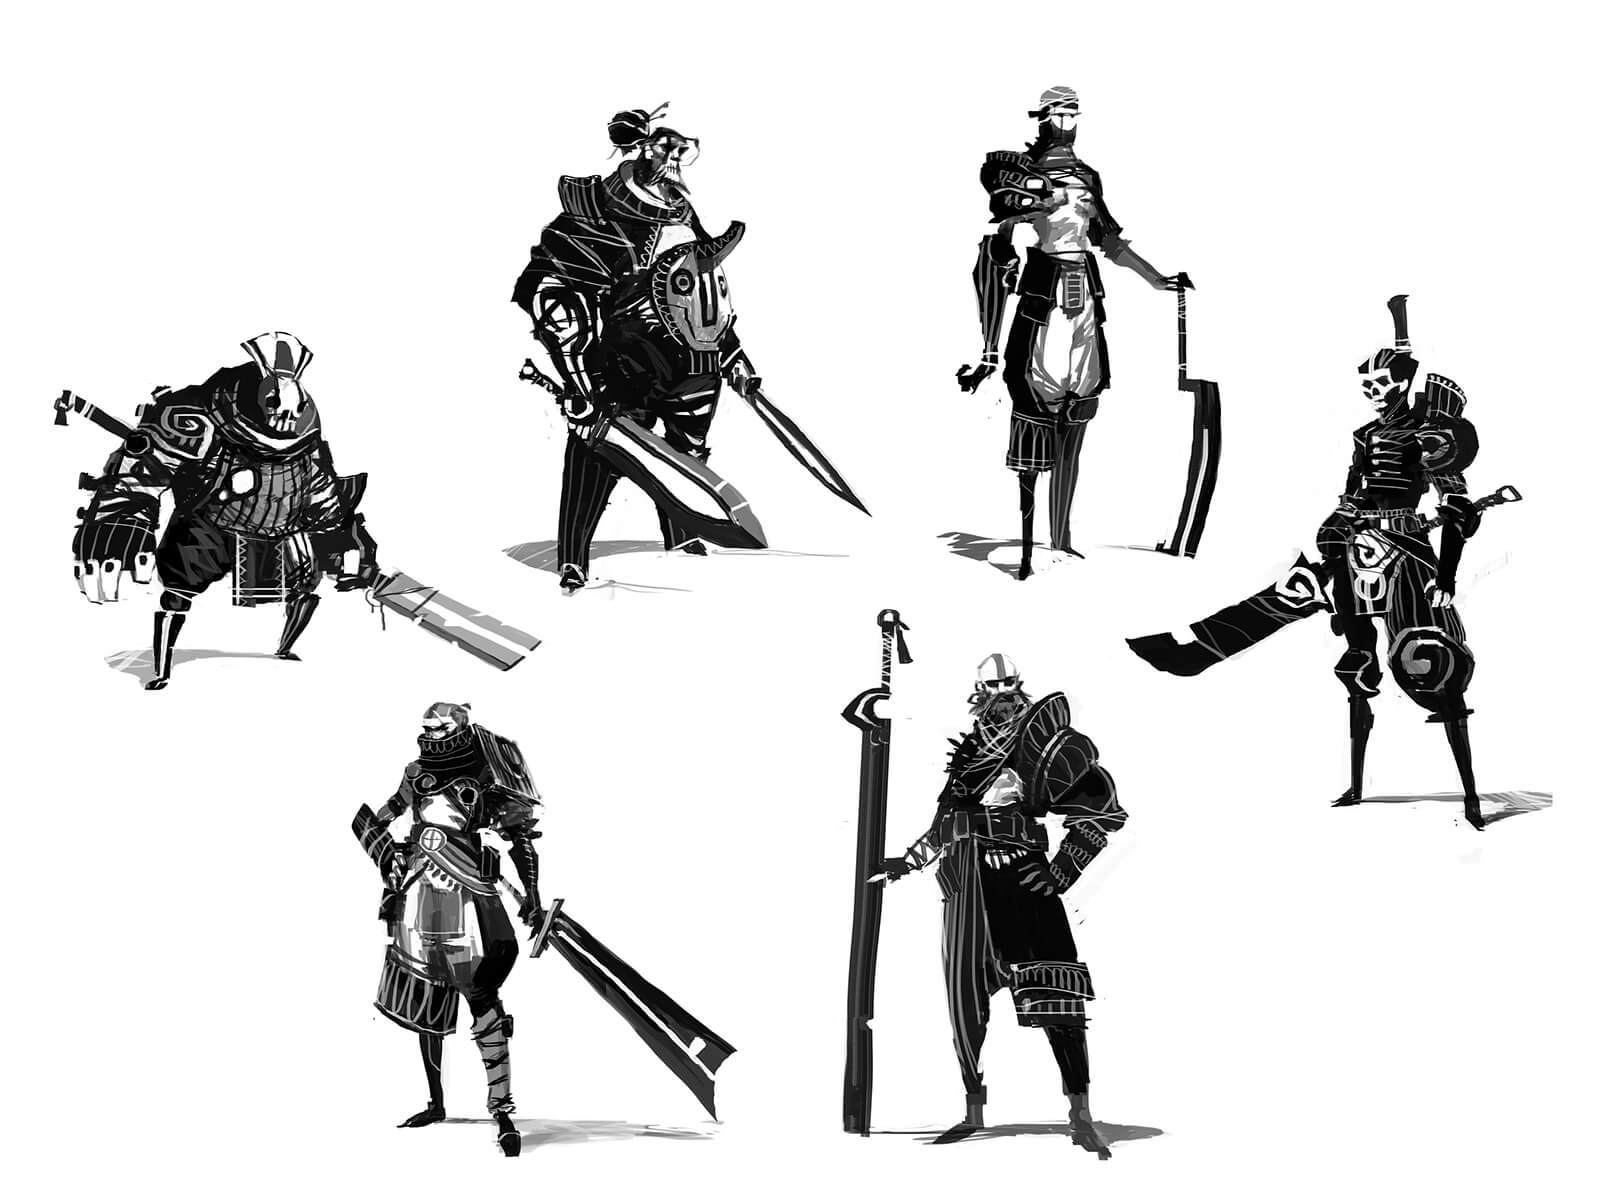 Black-and-white sketches of fearsome warriors posing with their oversized swords in ornate battle gear.